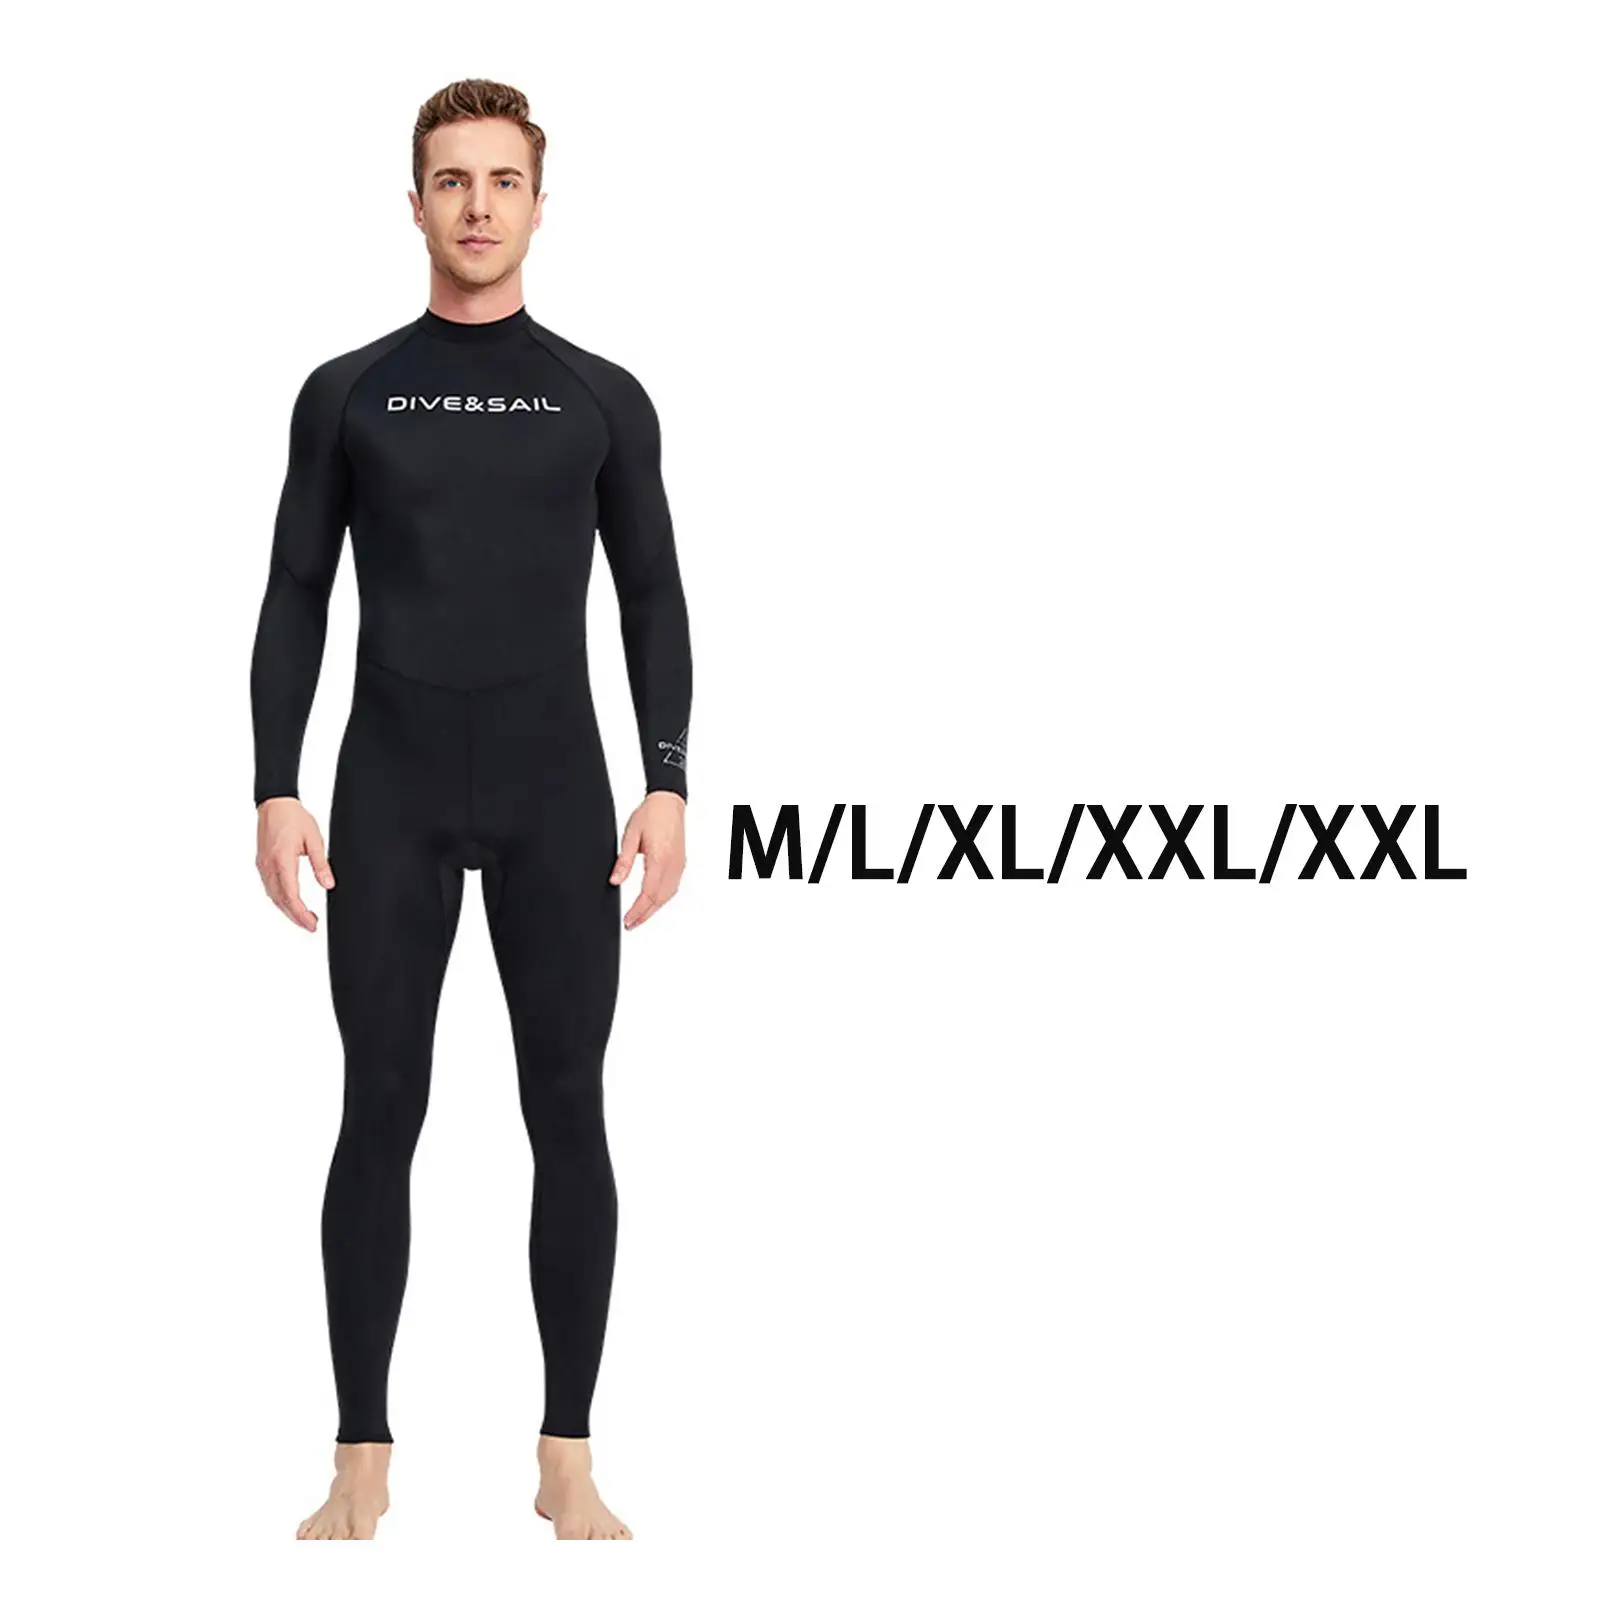 Super Stretch Diving Wetsuit Anti-Uv Swimming Surfing Kayaking for Water Sports